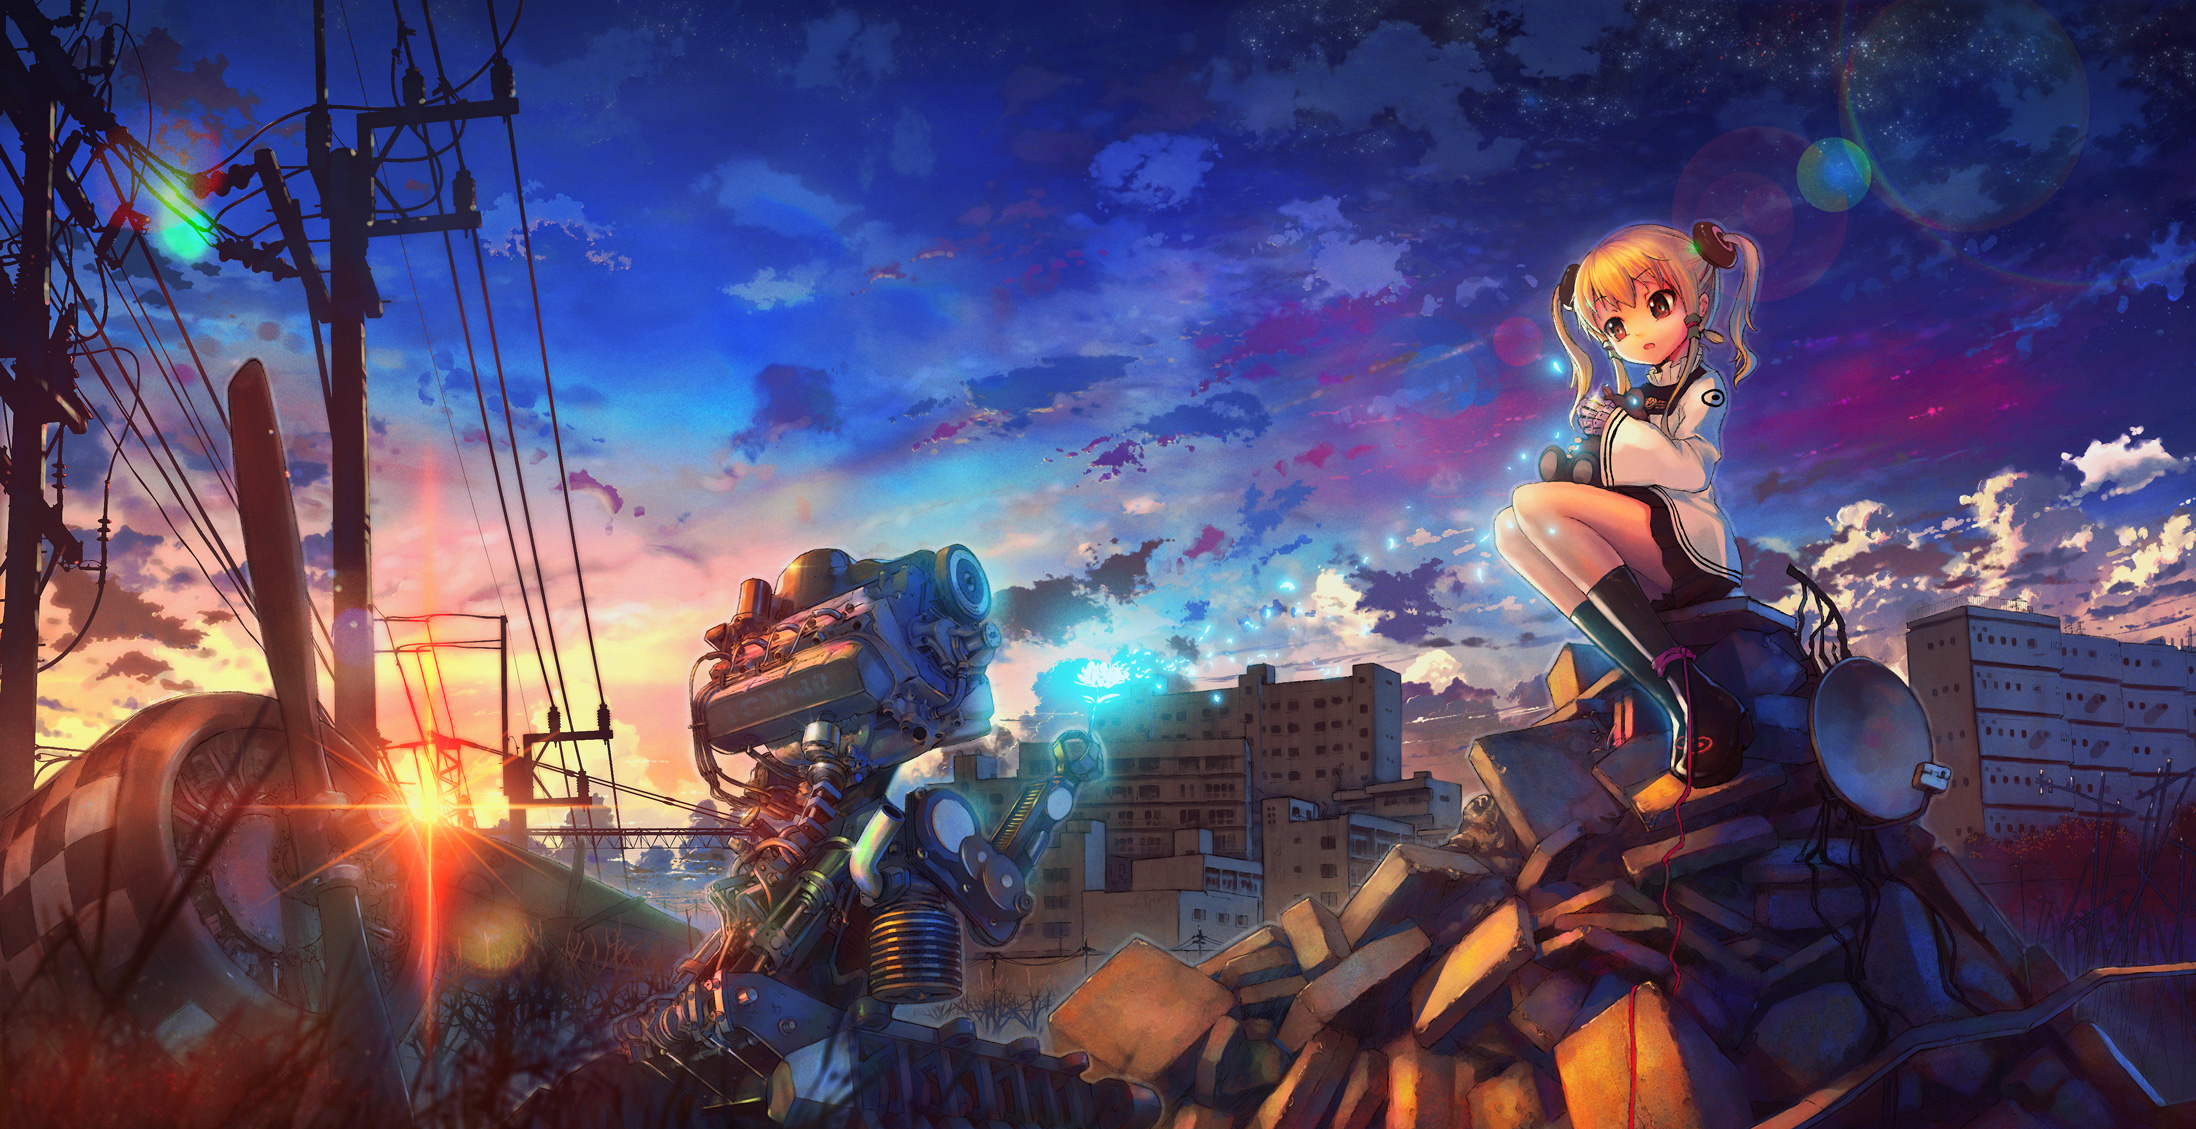 Anime cityscape at night with a mesmerizing sunset